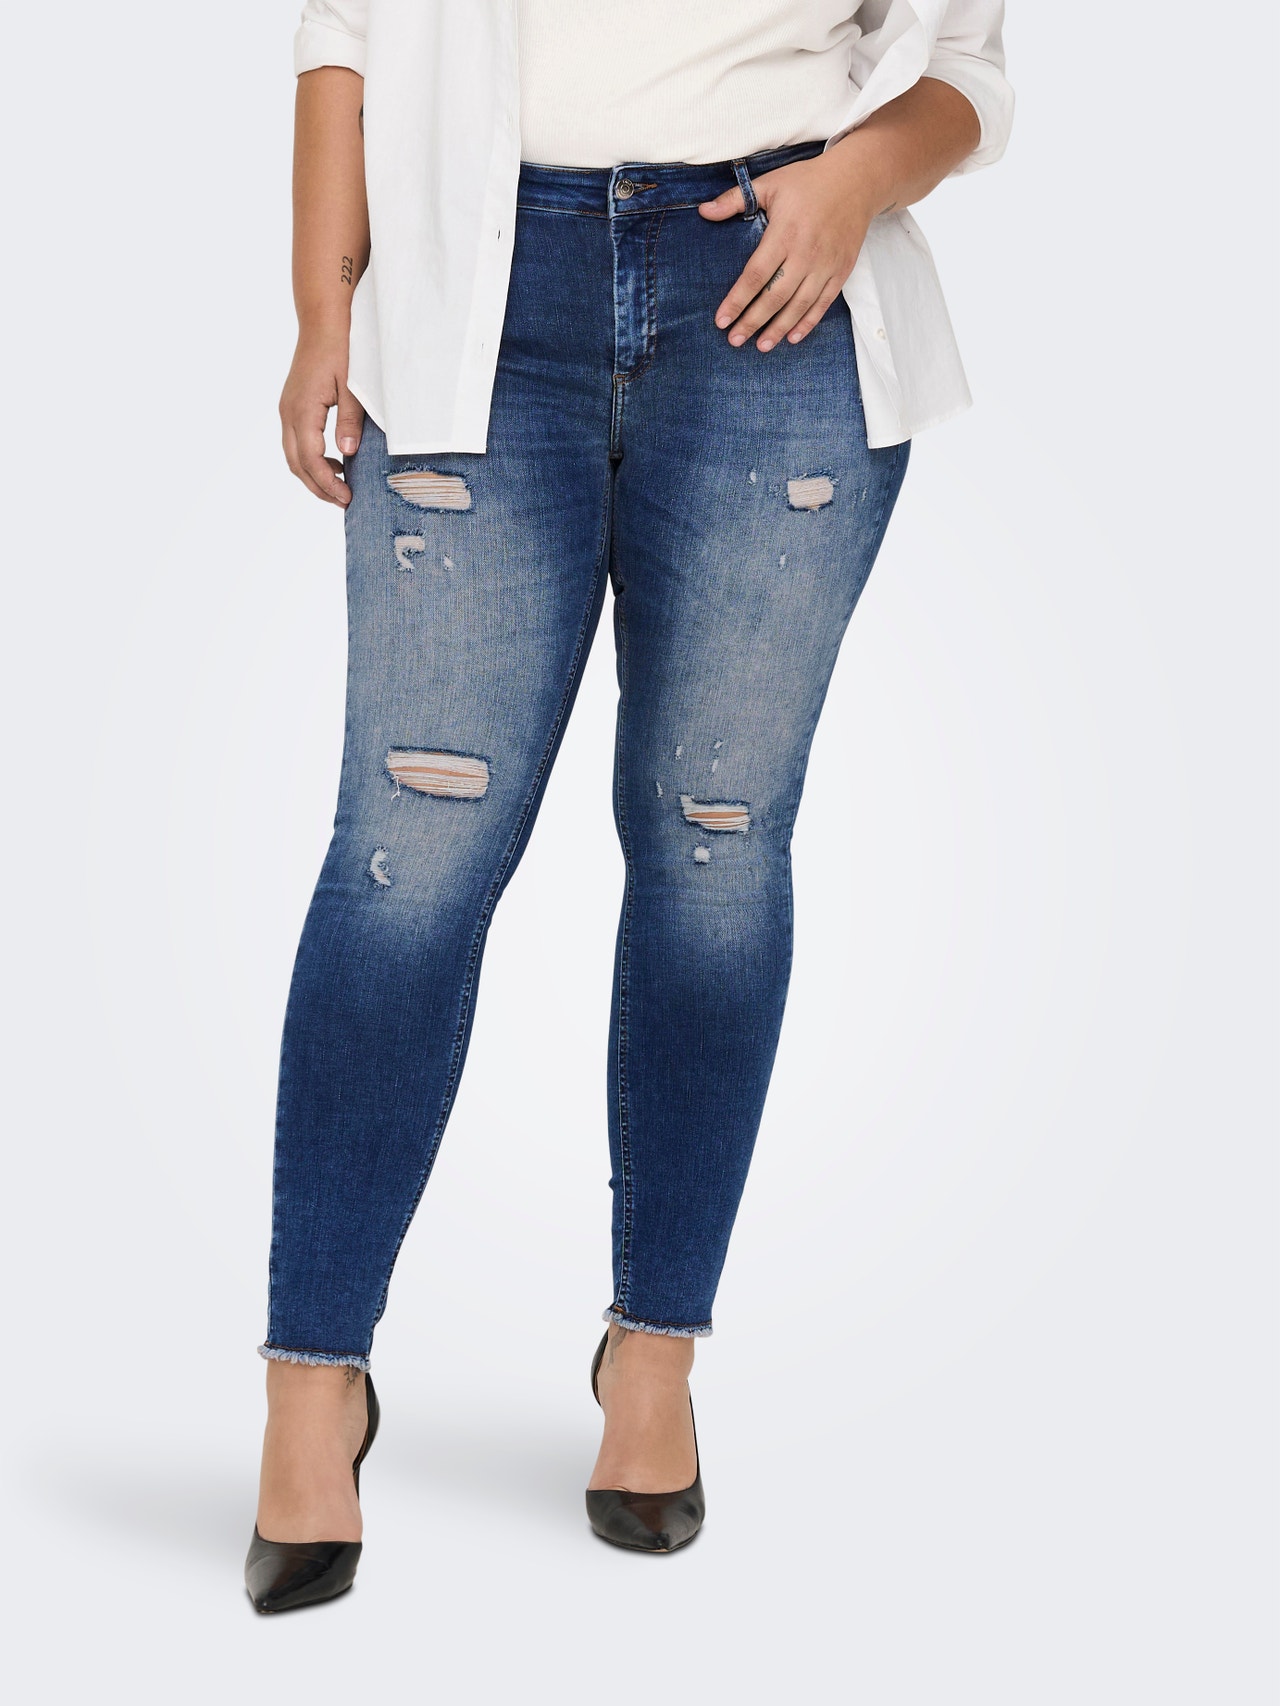 Buy Valentina High Rise Skinny Crop Pull-On Jeans Plus Size for